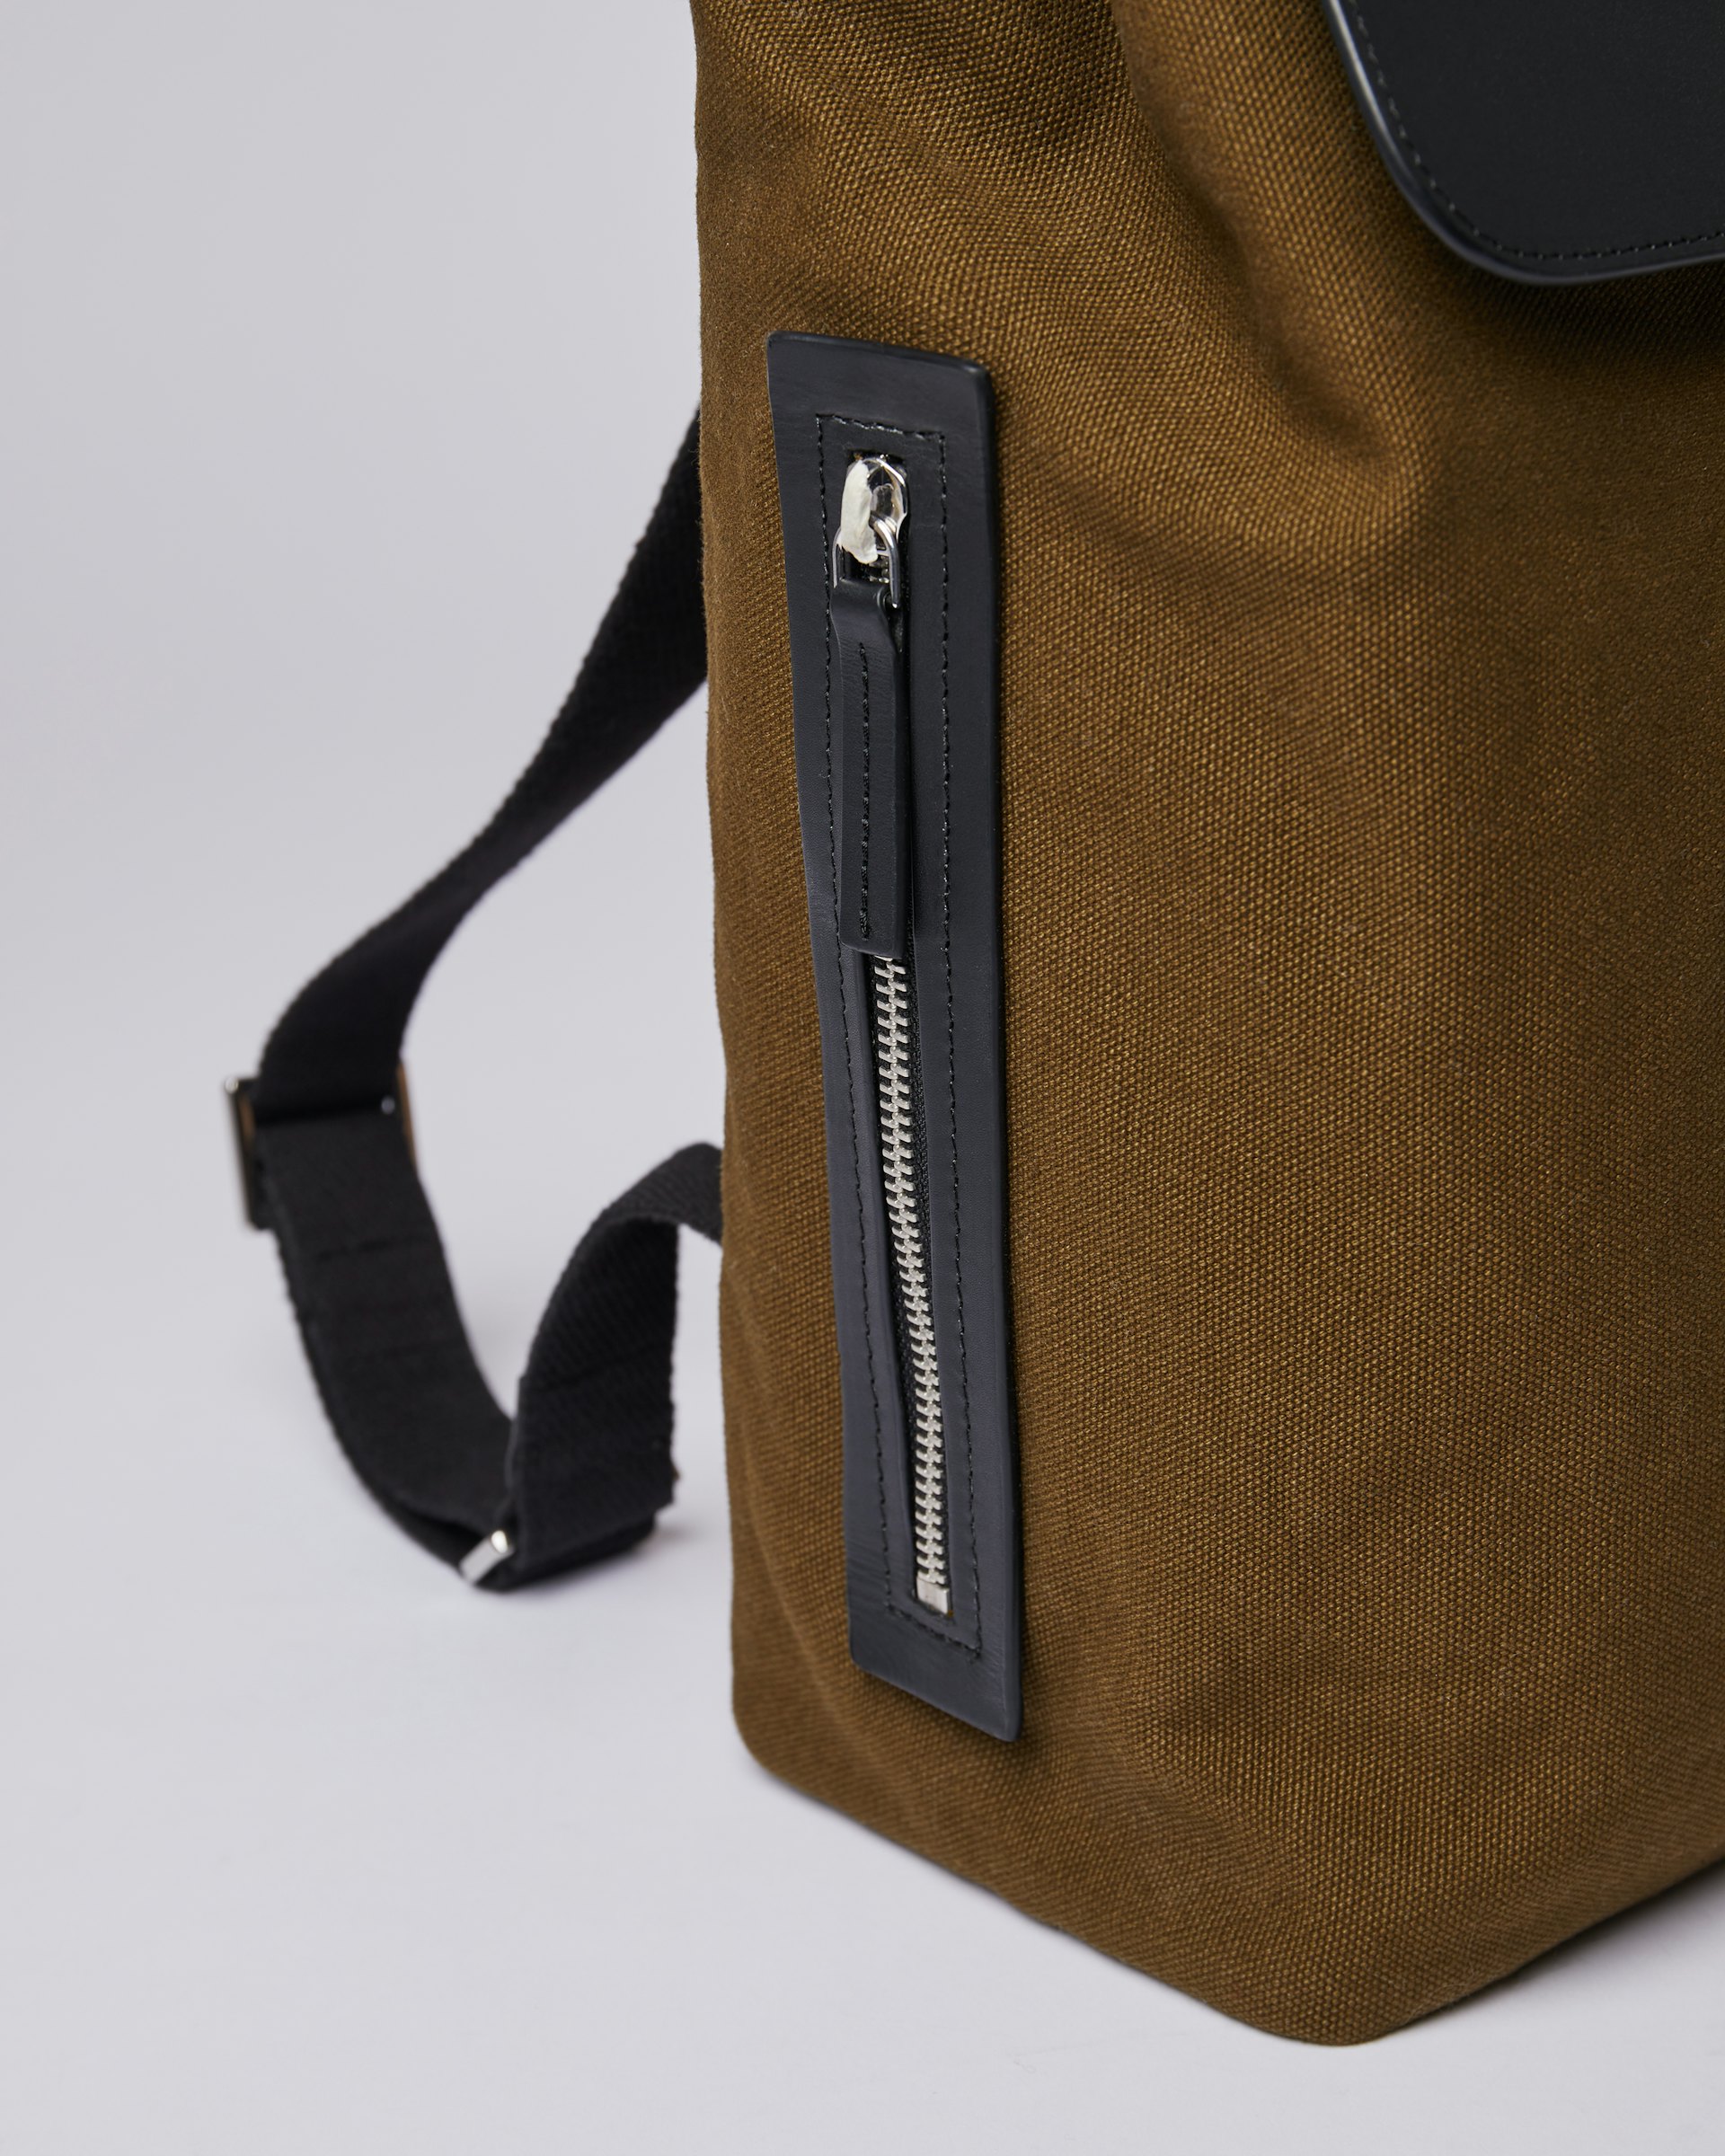 Alva Metal Hook belongs to the category Backpacks and is in color black & olive (5 of 6)